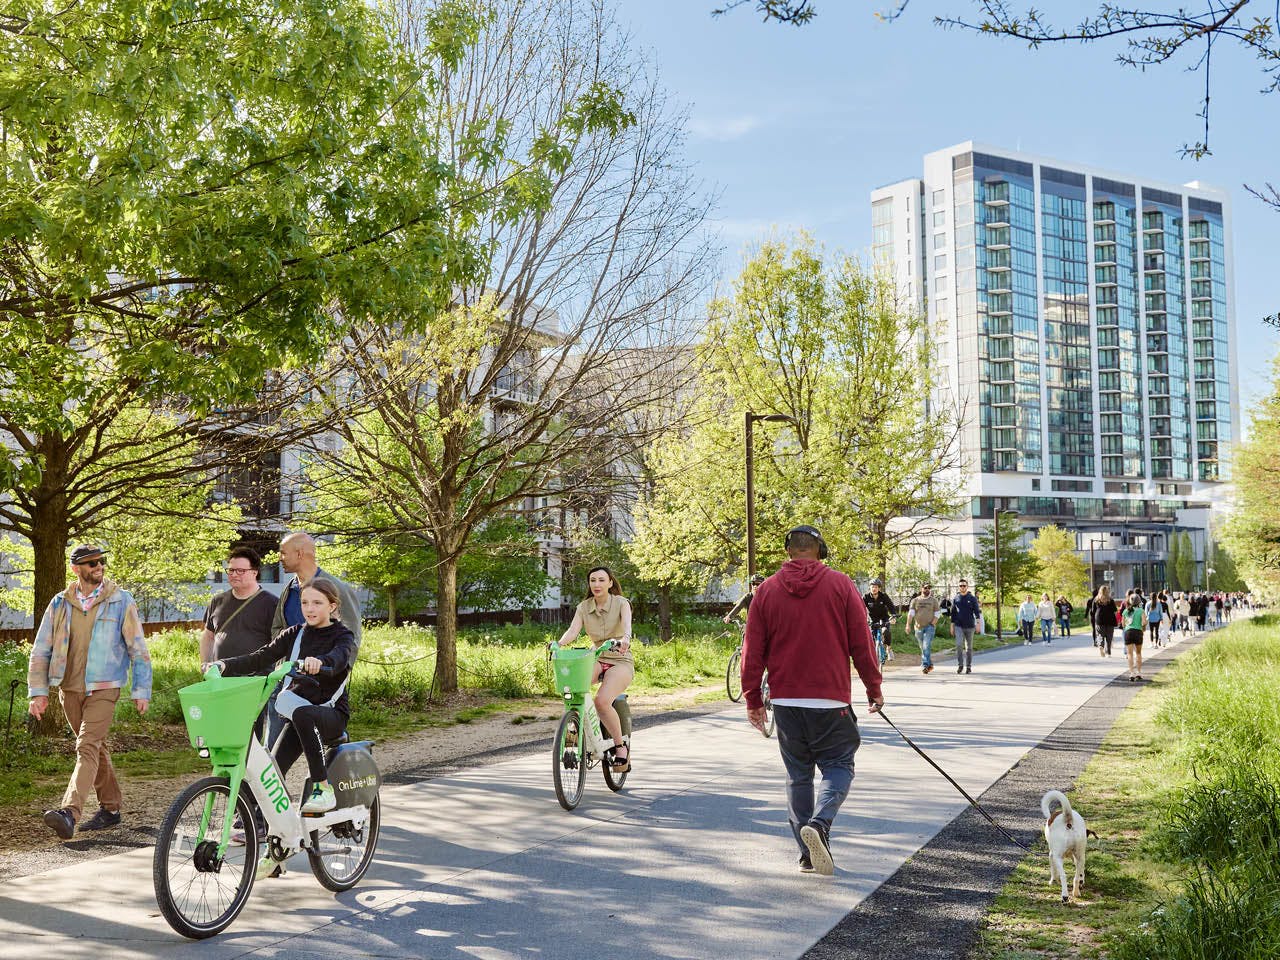 People ride bikes and walk dogs on the Eastside Trail with trees and buildings in the background. (Photo Credit: Erin Sintos)